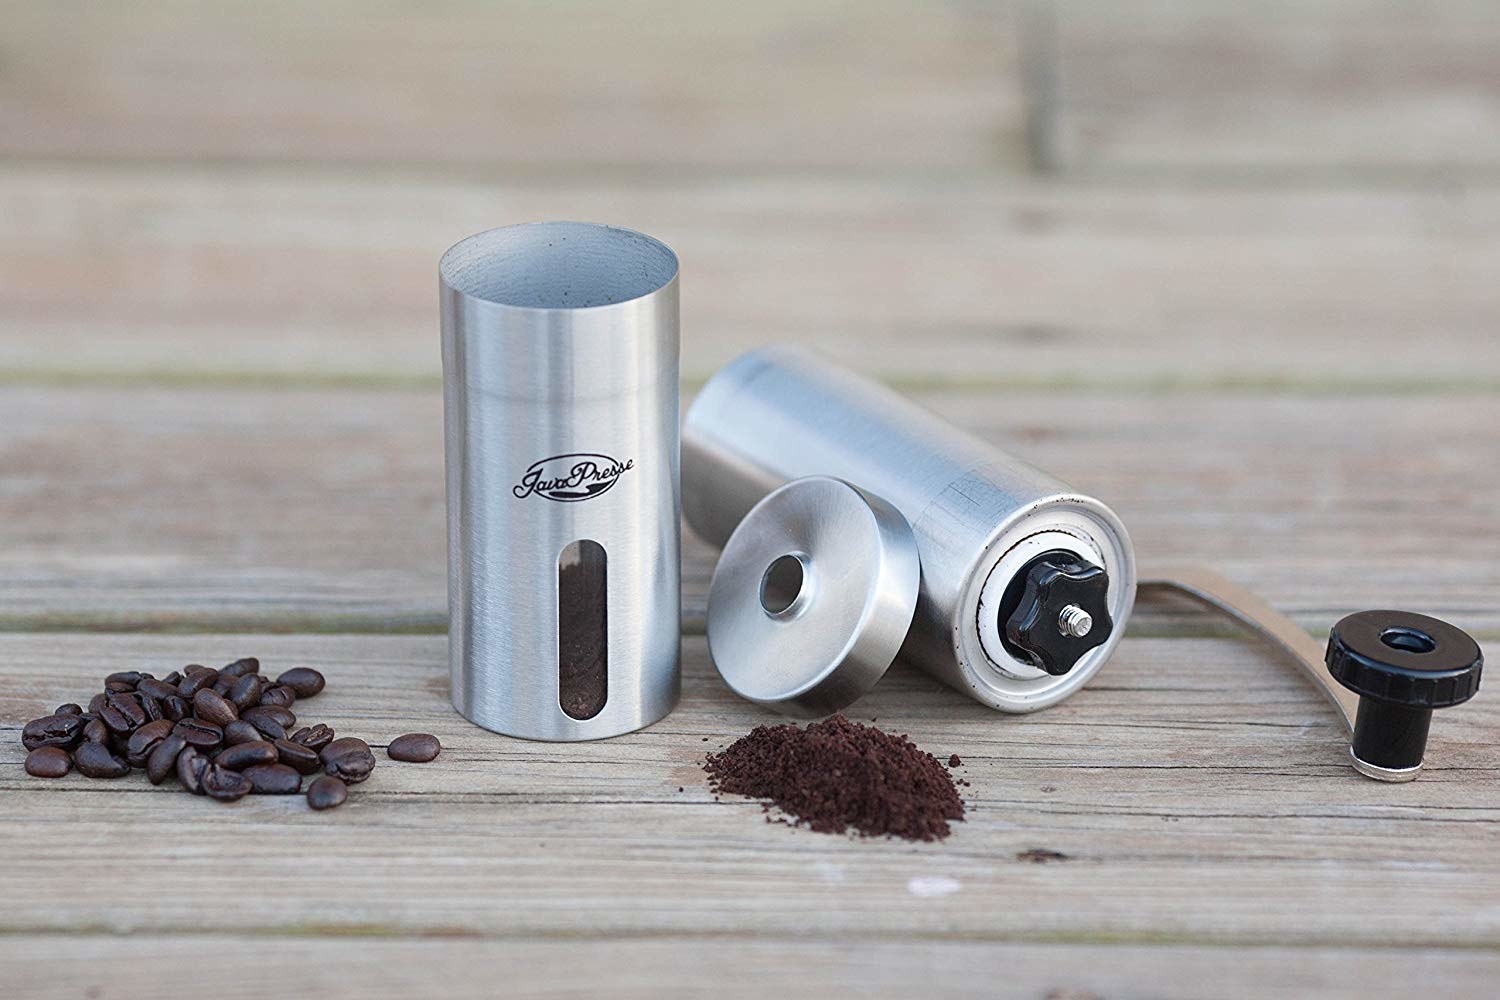 The grinder surrounded by coffee beans and an example of some that it has ground.